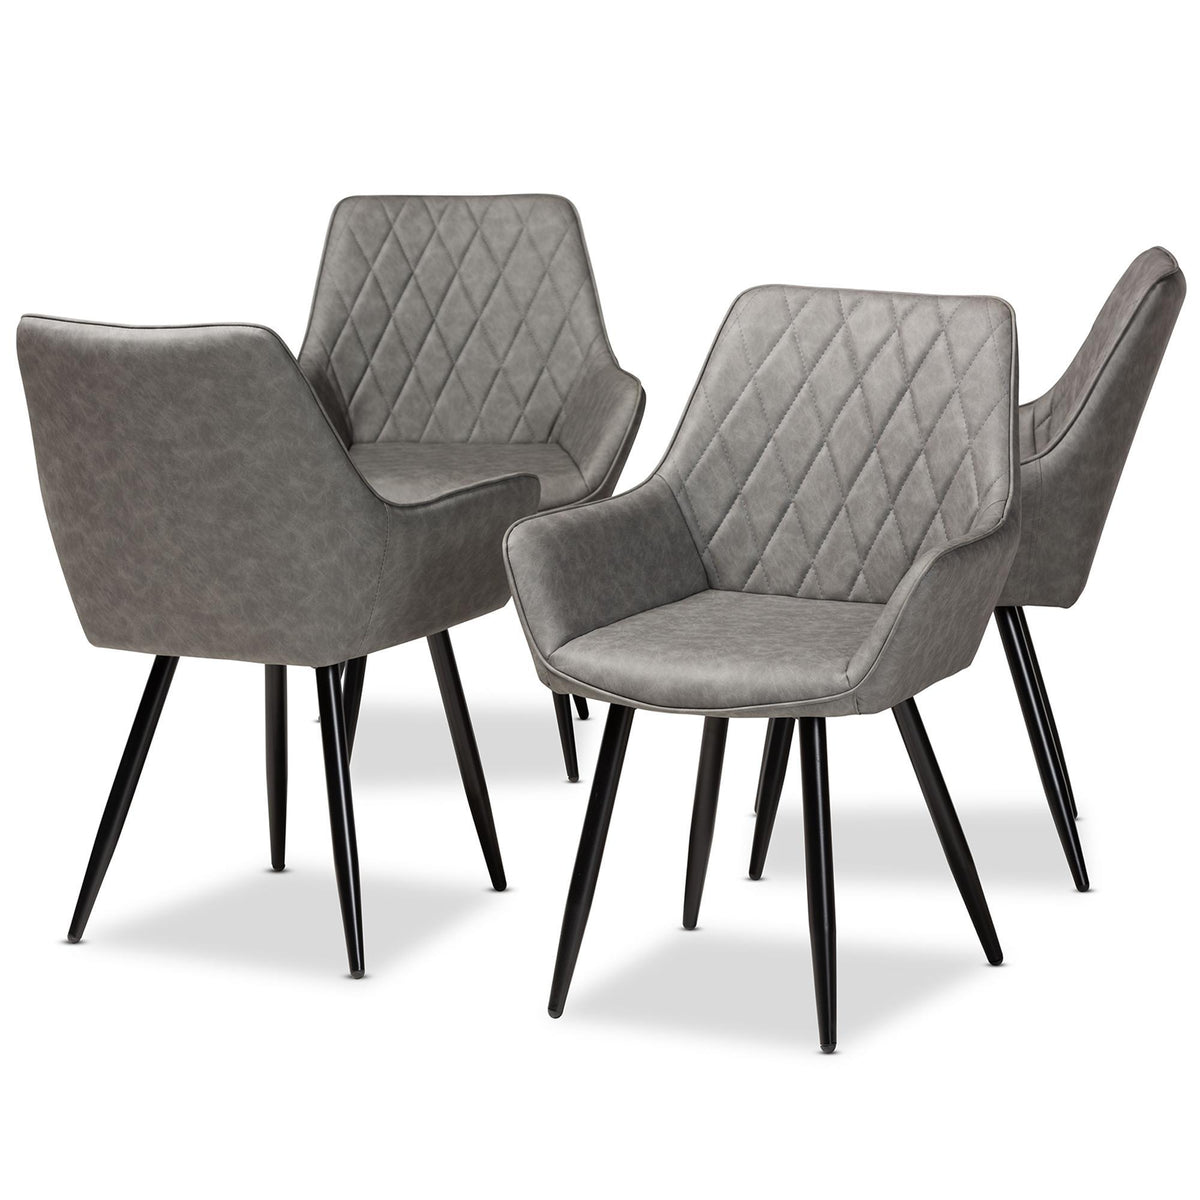 Baxton Studio Astrid Mid-Century Contemporary Grey Faux Leather Upholstered And Black Metal 4-Piece Dining Chair Set - 19A09-Grey/Black-DC